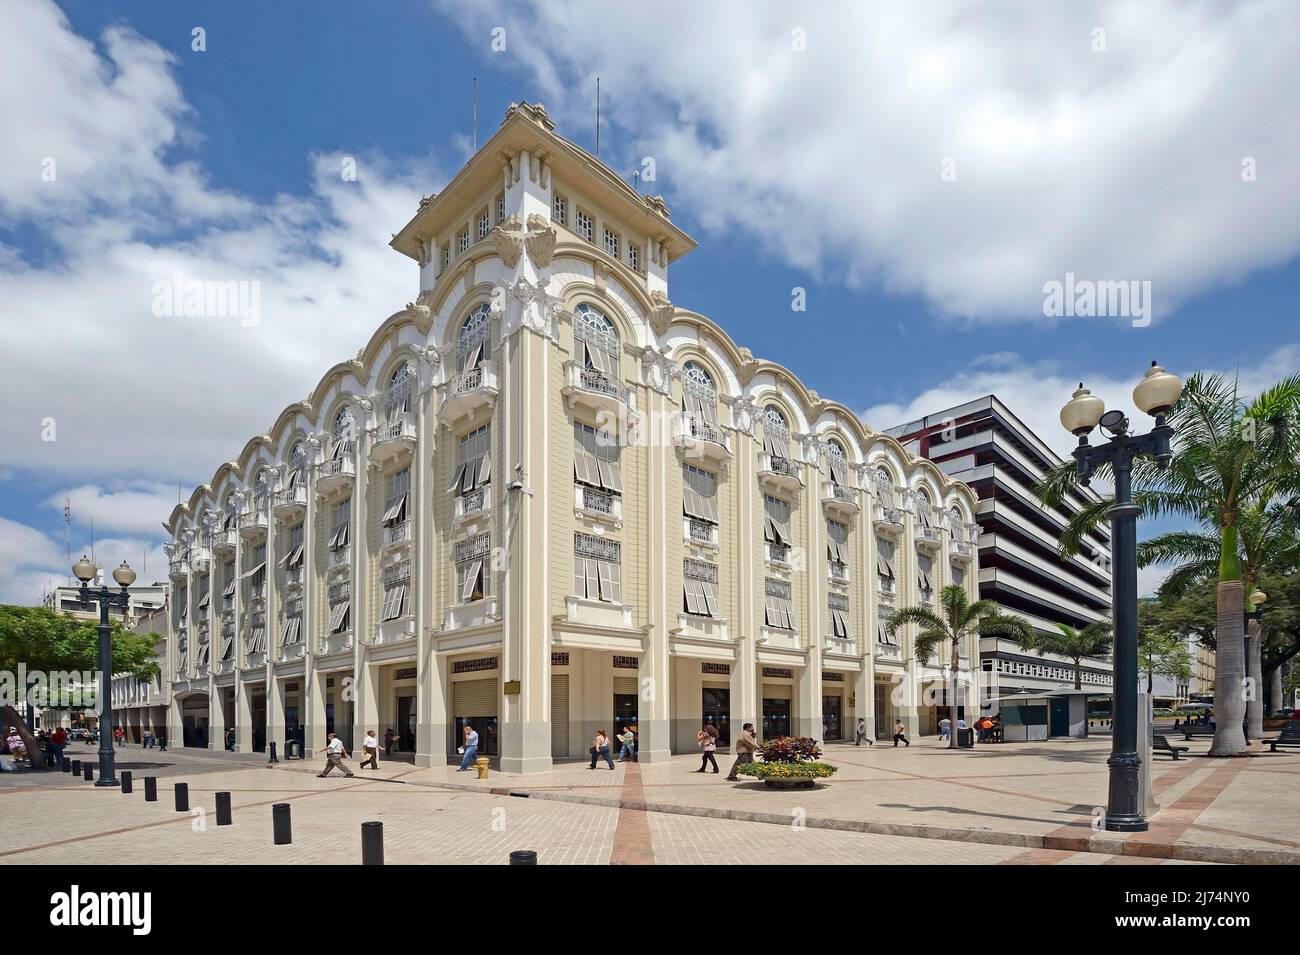 Historic building in the old town, colonial style, Ecuador, Guayaquil Stock Photo